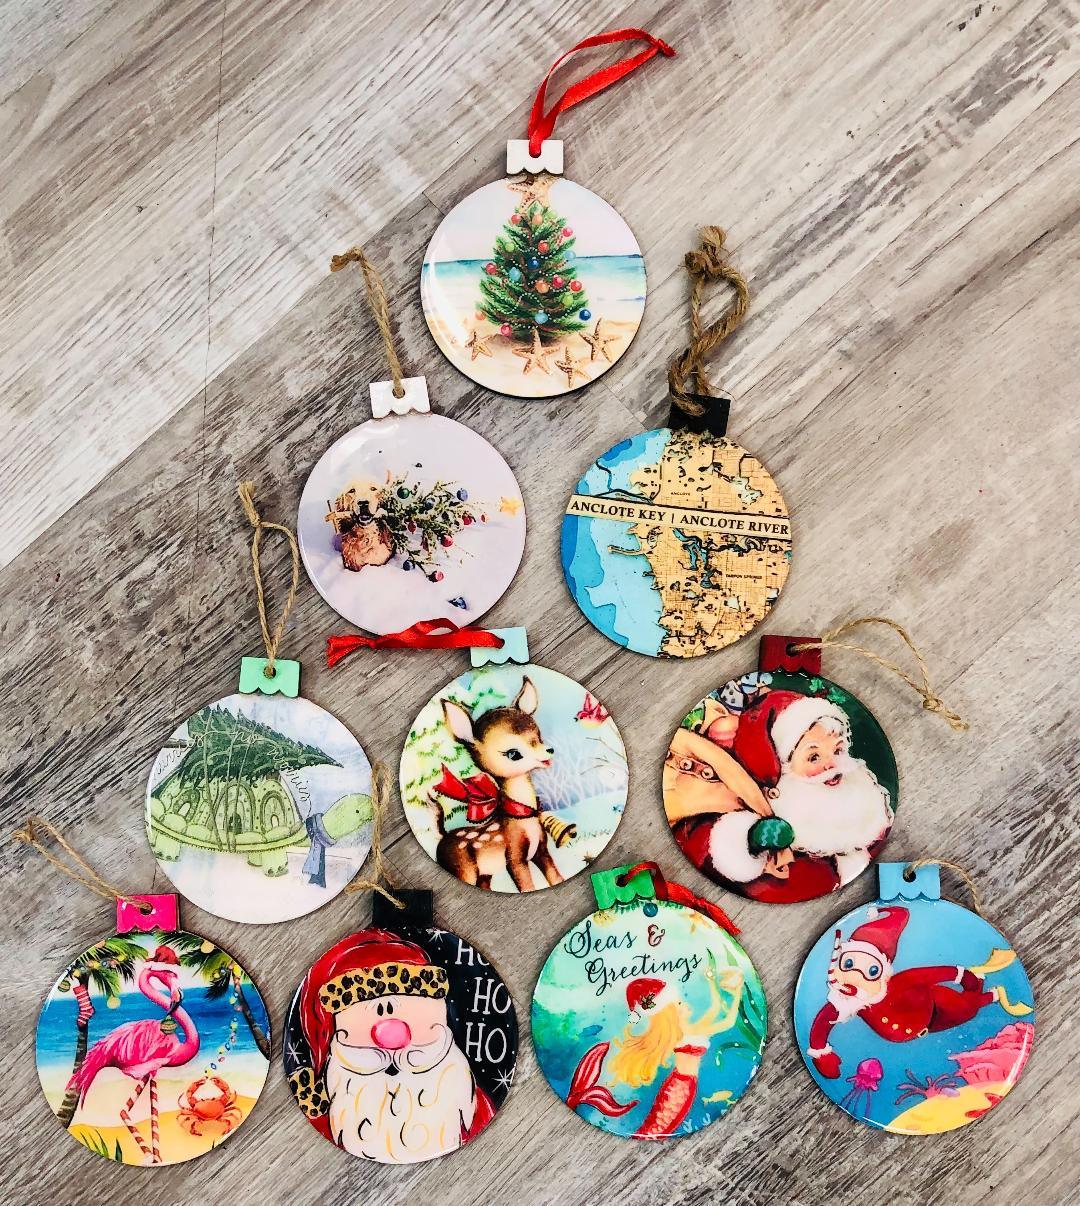 Painting: Wooden Ornaments